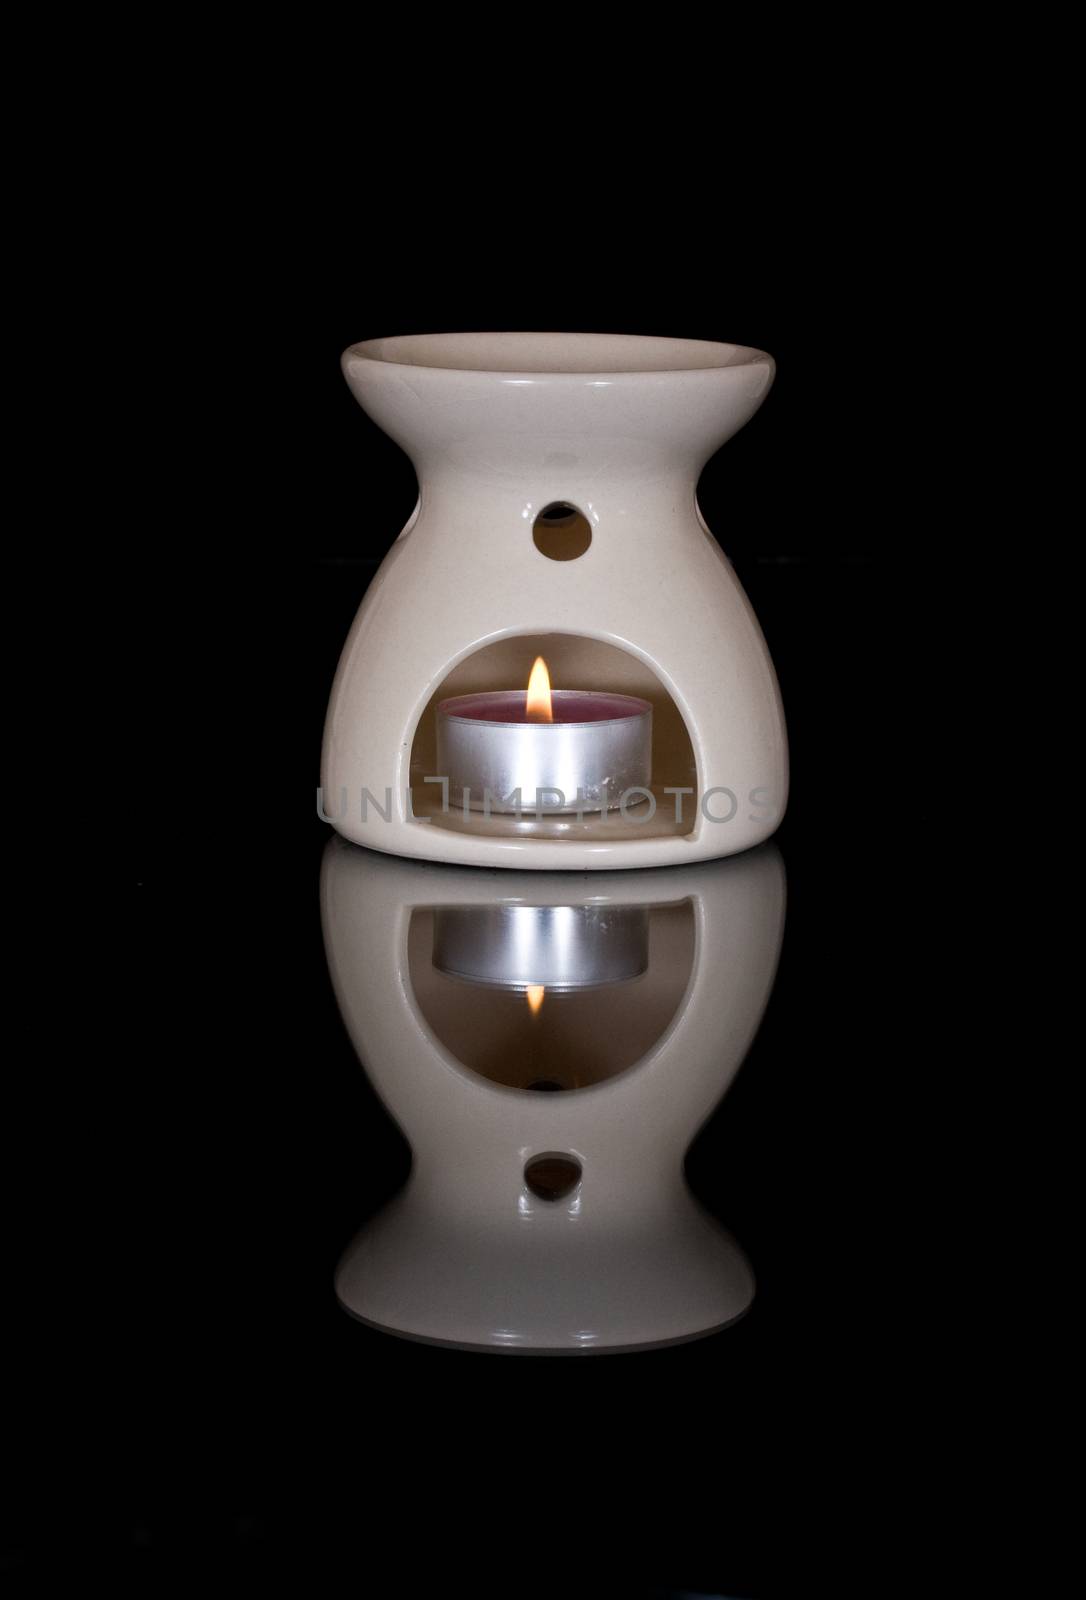 Aromatherapy Burner in the warm glow of candlelight.